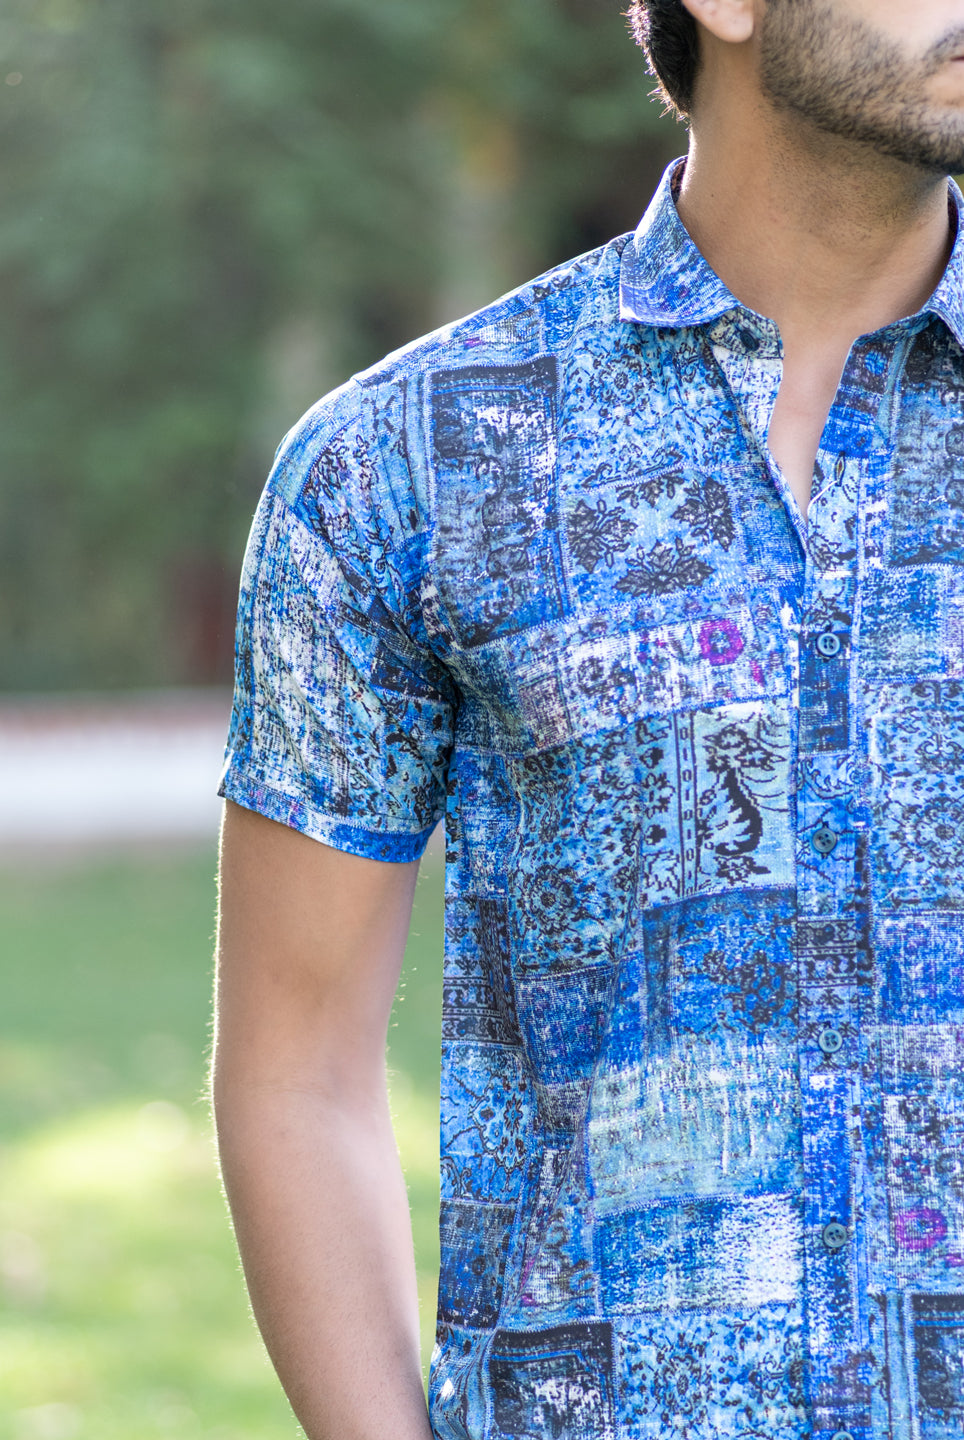 printed blue shirts for men